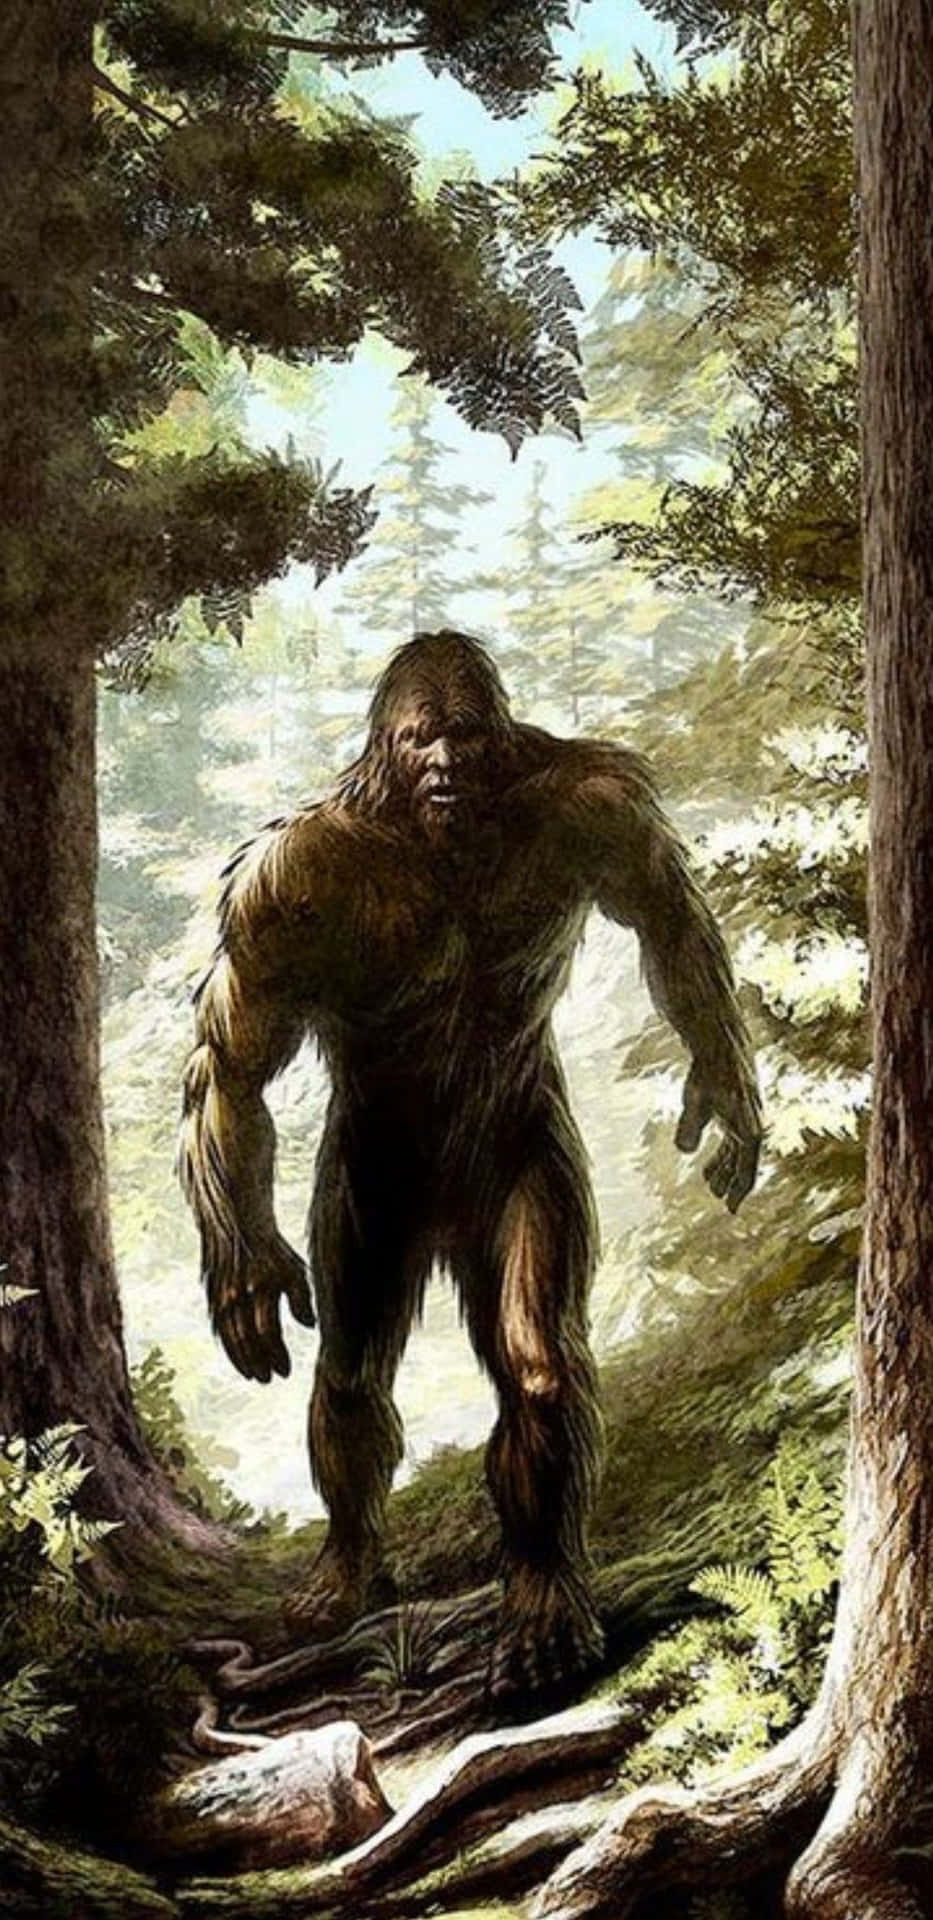 A Rendition of the iconic Bigfoot